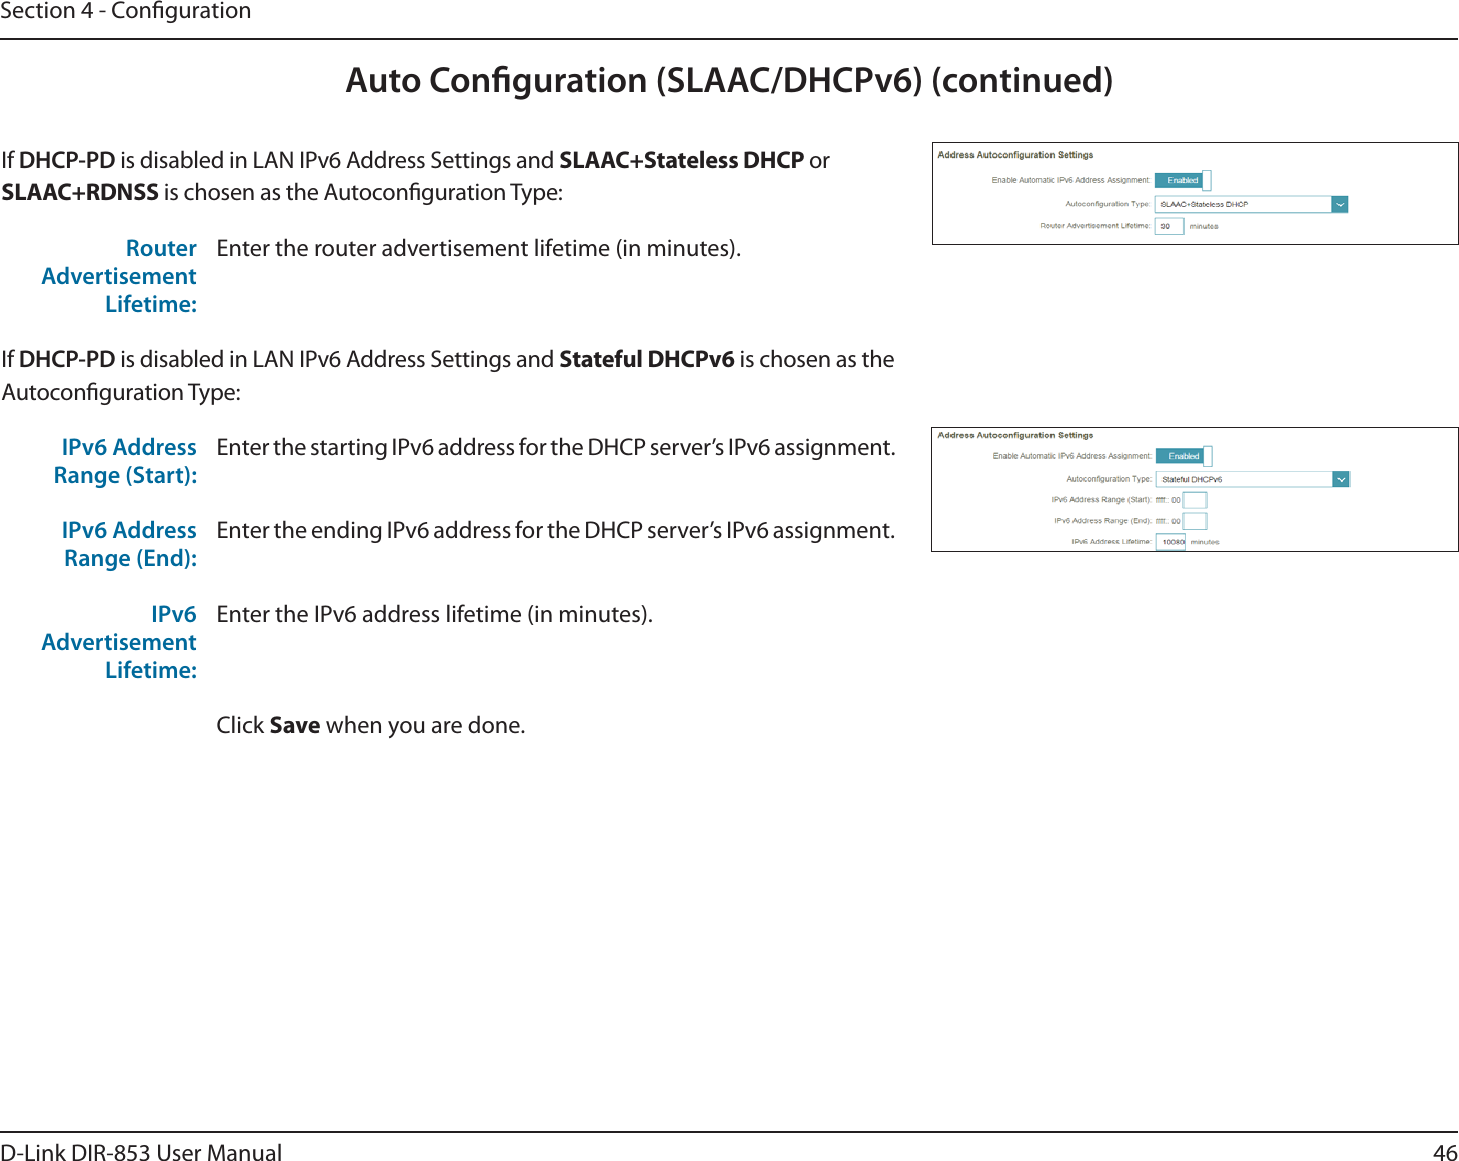 46D-Link DIR-853 User ManualSection 4 - CongurationAuto Conguration (SLAAC/DHCPv6) (continued)If DHCP-PD is disabled in LAN IPv6 Address Settings and SLAAC+Stateless DHCP or SLAAC+RDNSS is chosen as the Autoconguration Type:Router Advertisement Lifetime:Enter the router advertisement lifetime (in minutes).If DHCP-PD is disabled in LAN IPv6 Address Settings and Stateful DHCPv6 is chosen as the Autoconguration Type:IPv6 Address Range (Start):Enter the starting IPv6 address for the DHCP server’s IPv6 assignment.IPv6 Address Range (End):Enter the ending IPv6 address for the DHCP server’s IPv6 assignment.IPv6 Advertisement Lifetime:Enter the IPv6 address lifetime (in minutes).Click Save when you are done.